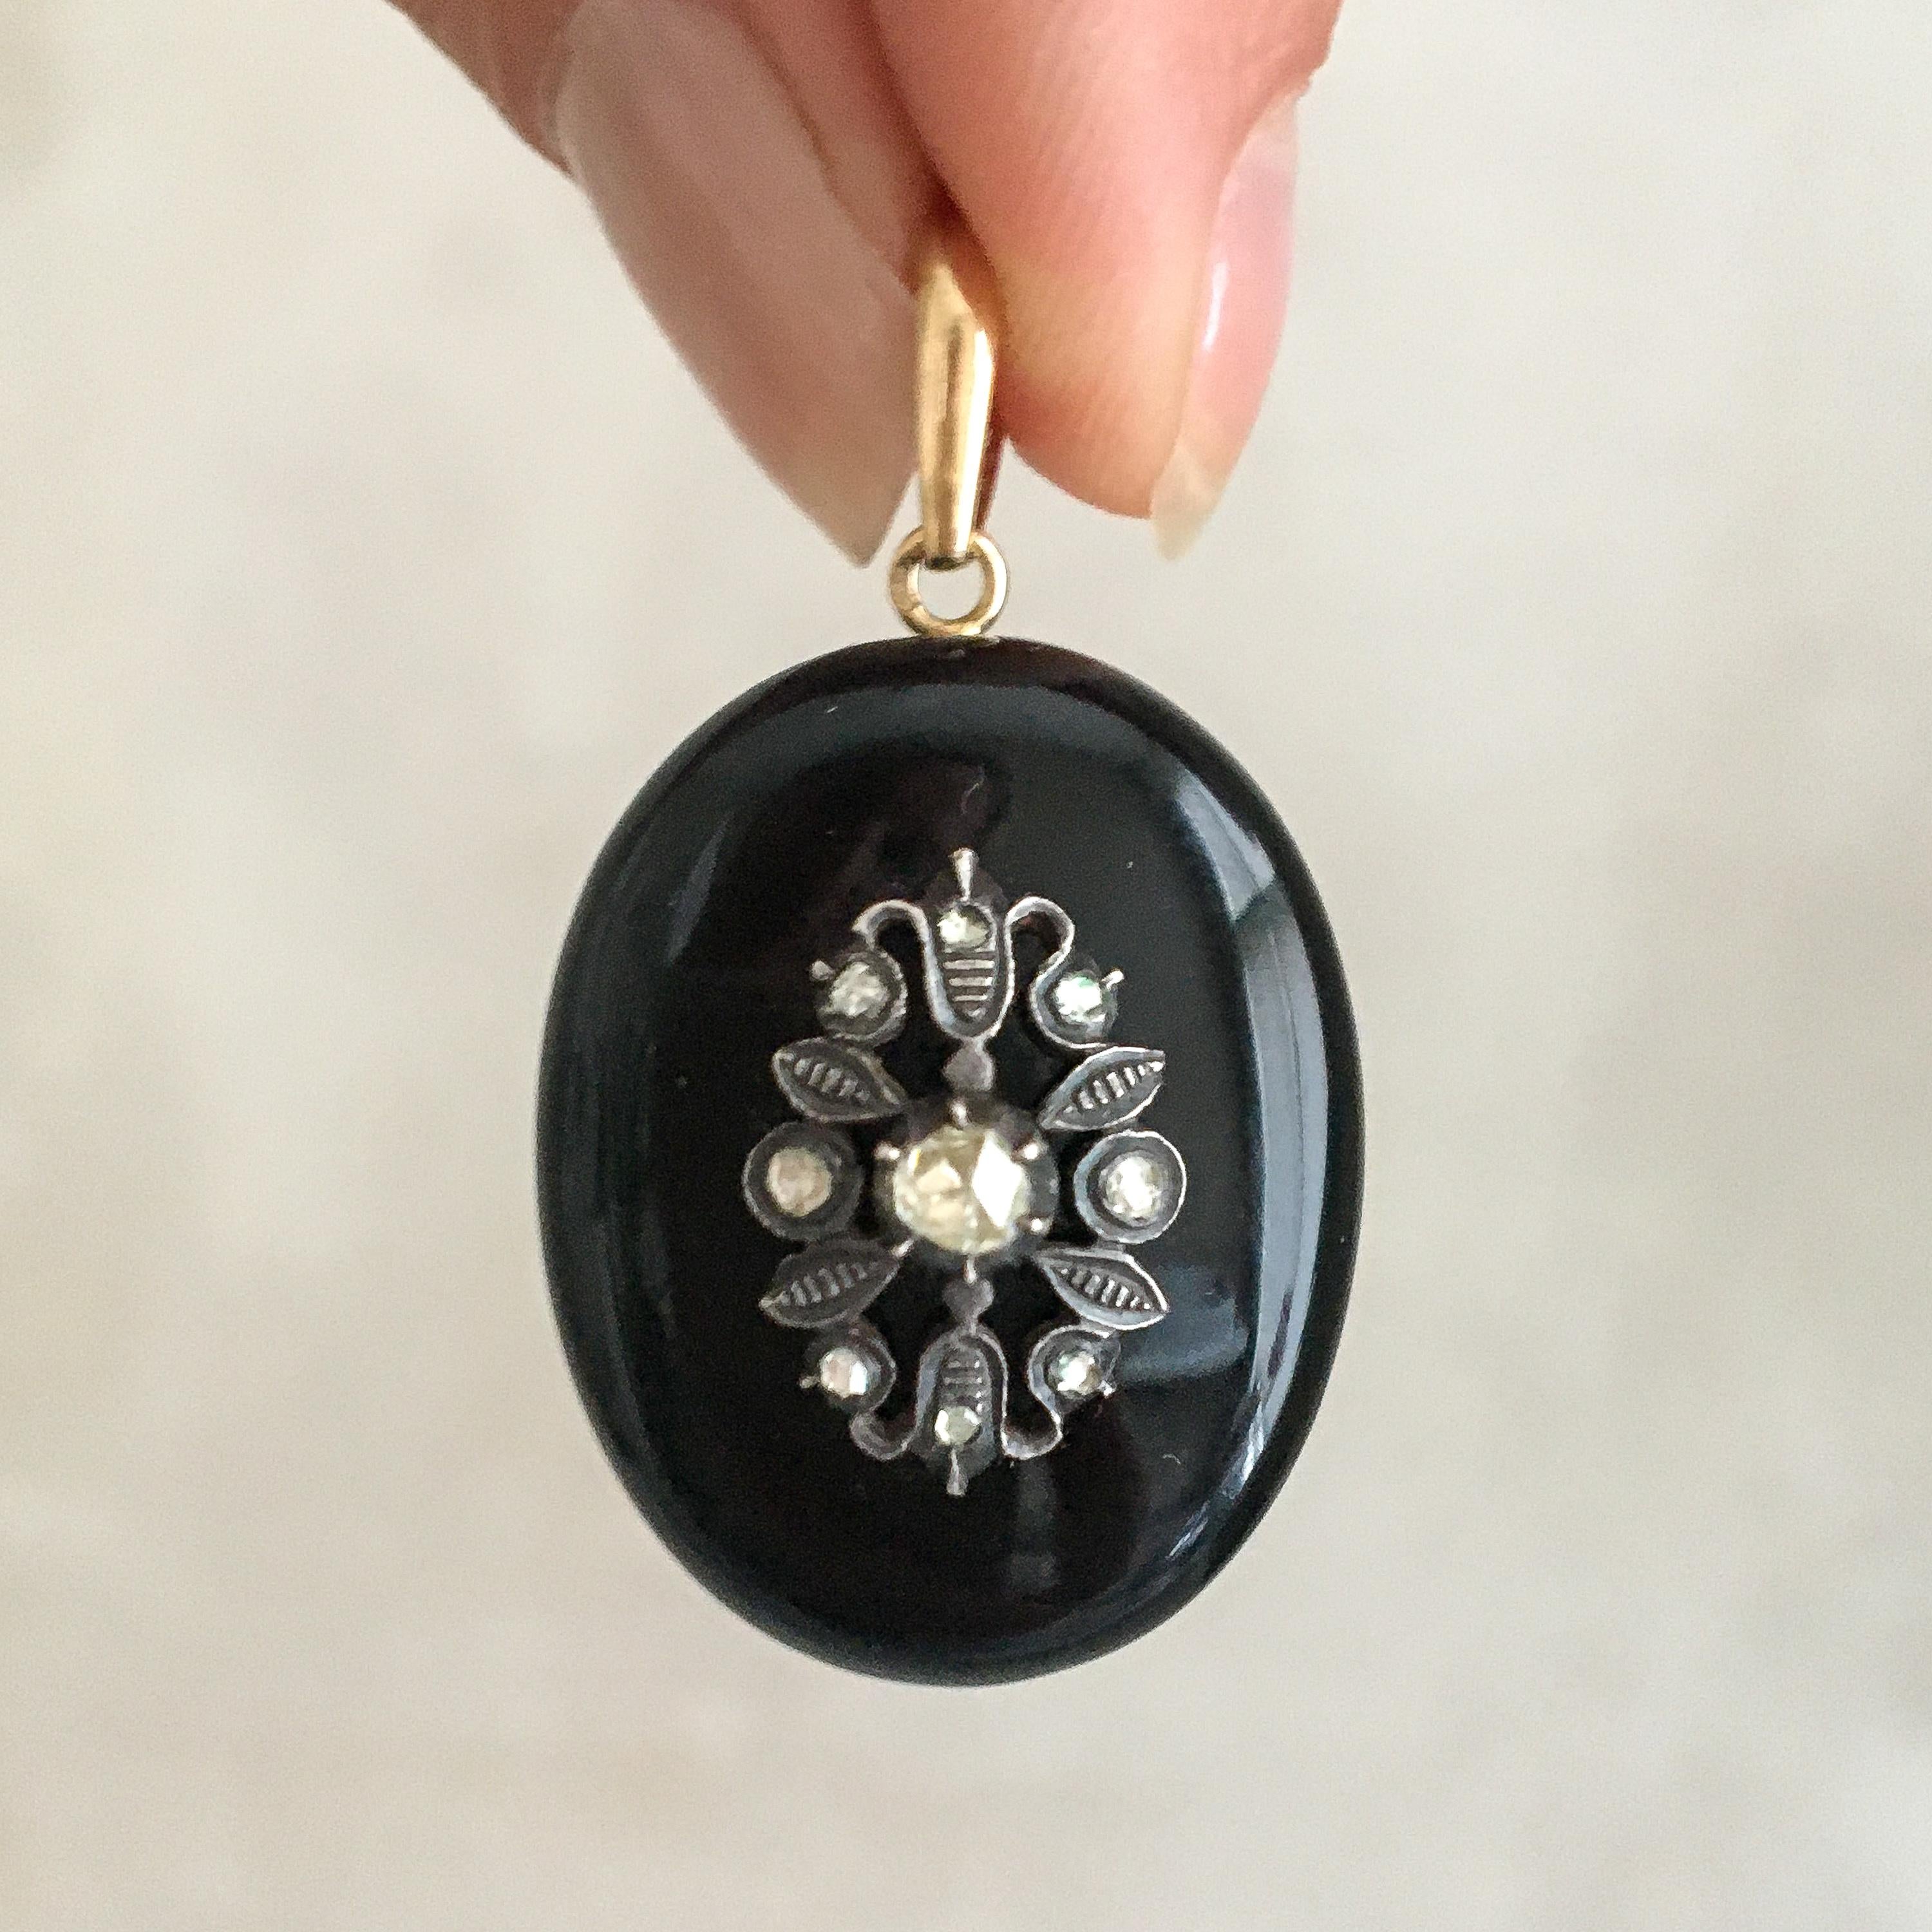 An antique Late Victorian, 1880-1890, diamond and onyx locket pendant. In the center, the onyx stone is decorated with a silver floral decor set with rose cut diamonds. The pendant is oval-shaped and is being held by a 14 karat gold bail. The onyx